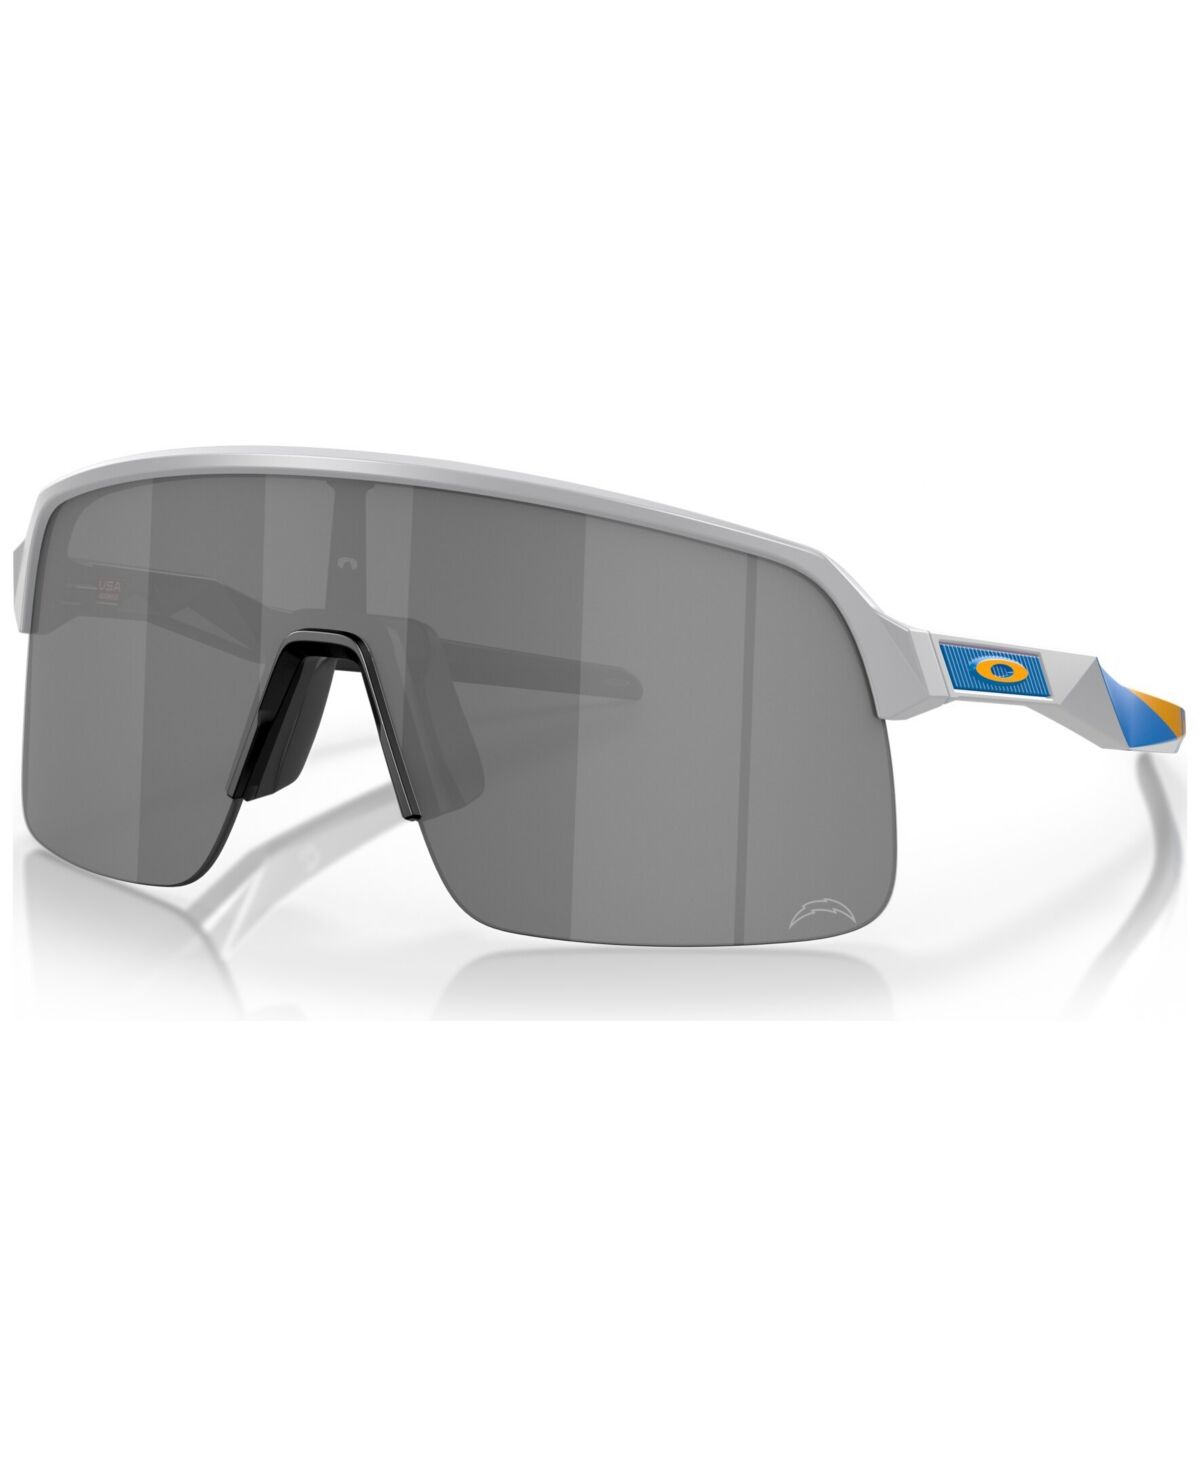 Oakley Men's Los Angeles Chargers Sutro Lite Sunglasses, Nfl Collection OO9463-3239 - Matte Fog